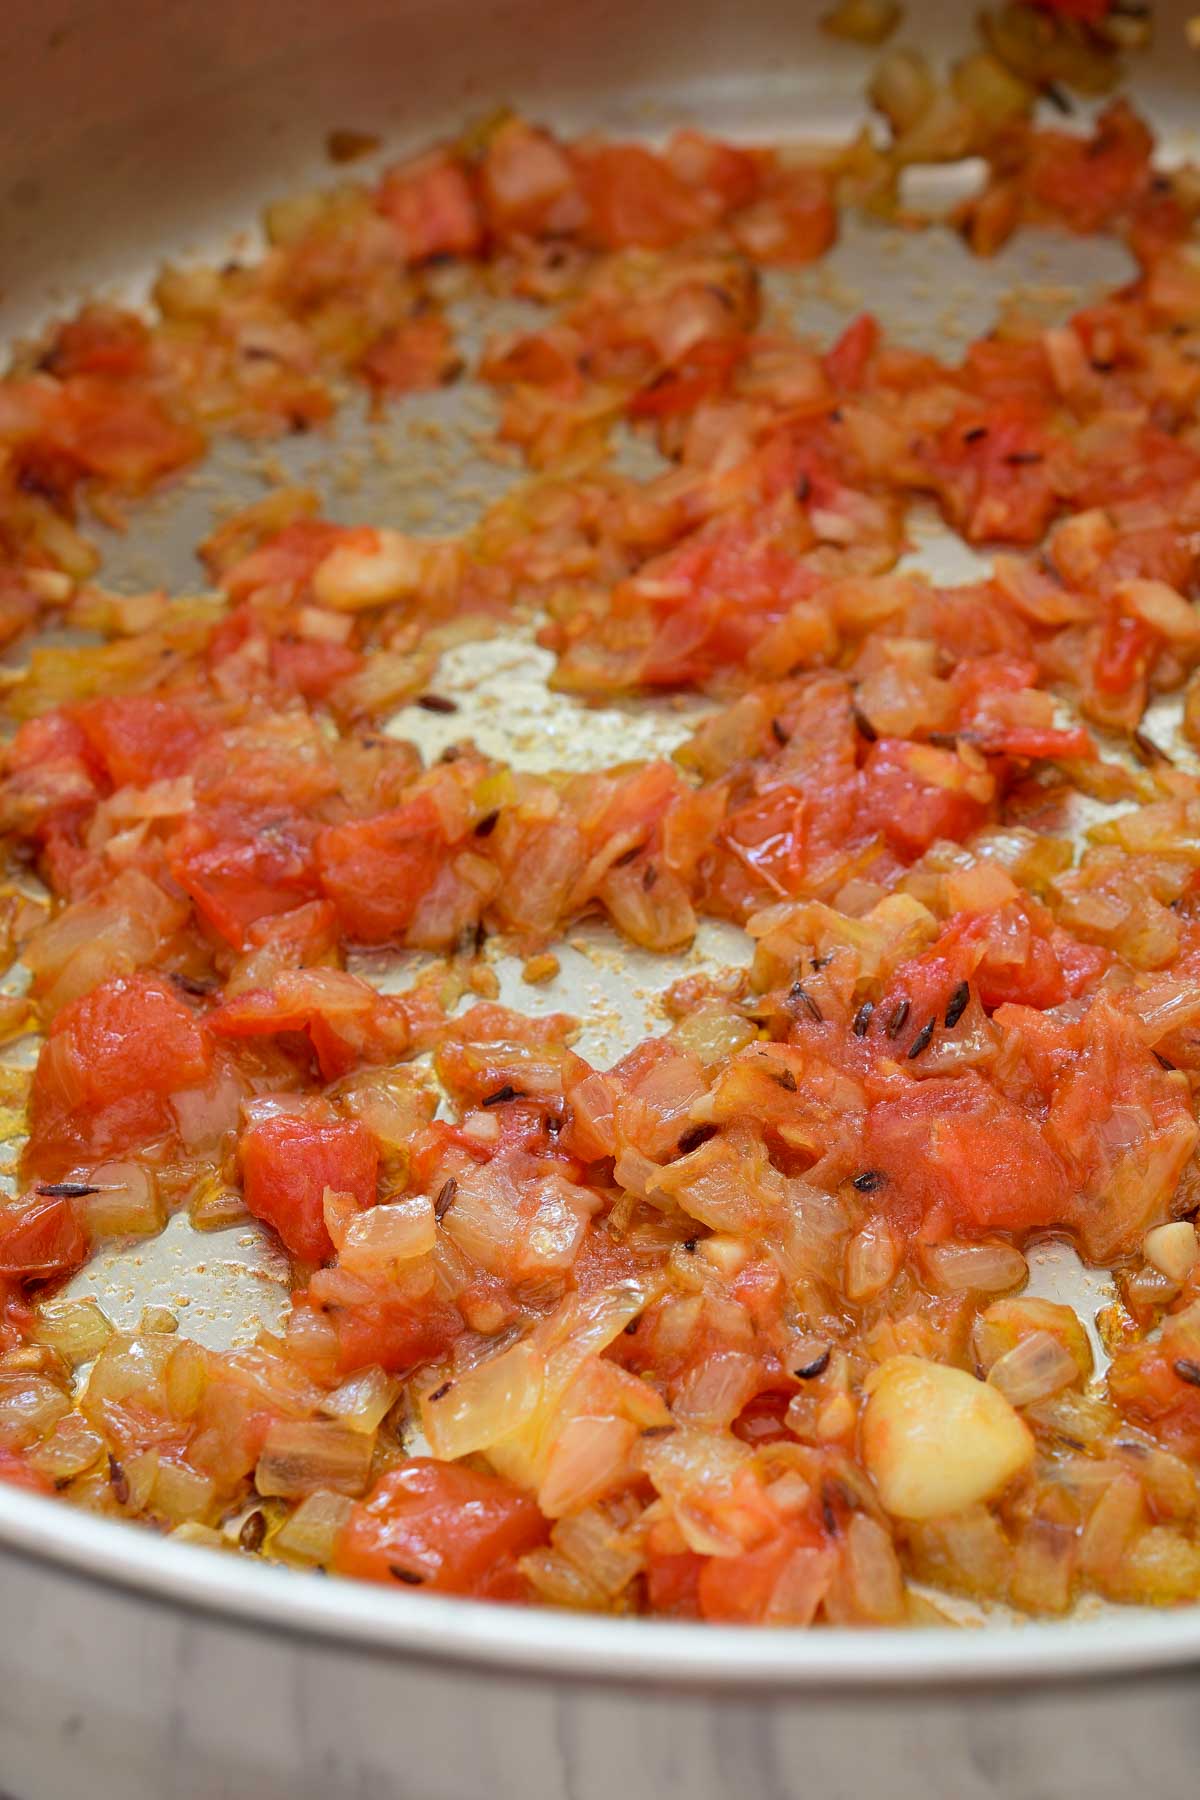 Fried tomato, onion and garlic in a pan.